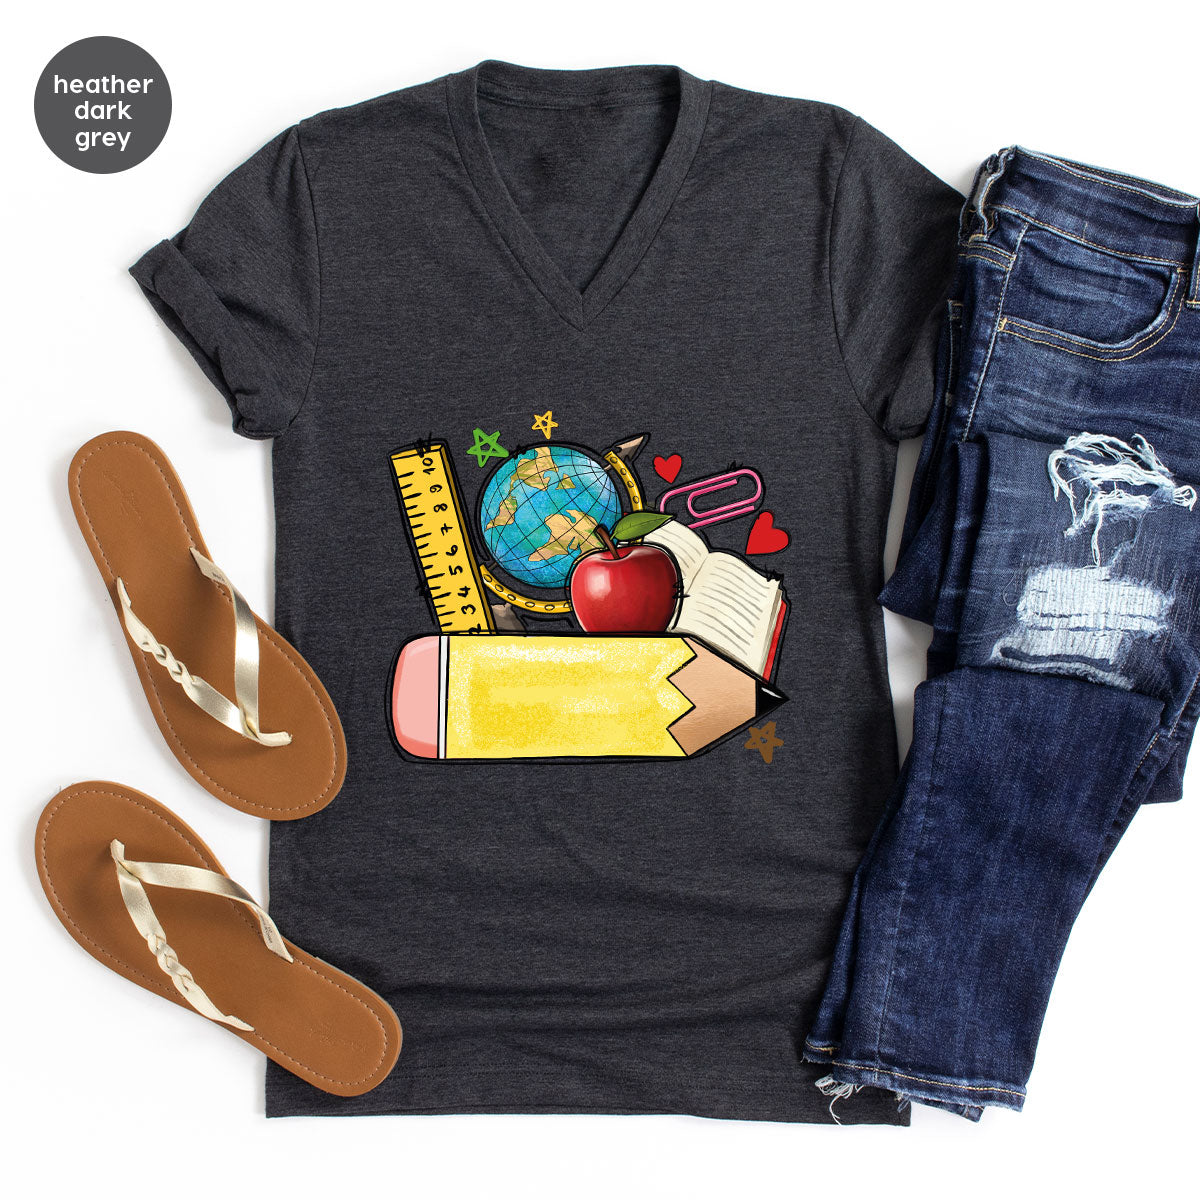 Funny Students Clothing, First Day of School Shirt, New Teacher Tshirt